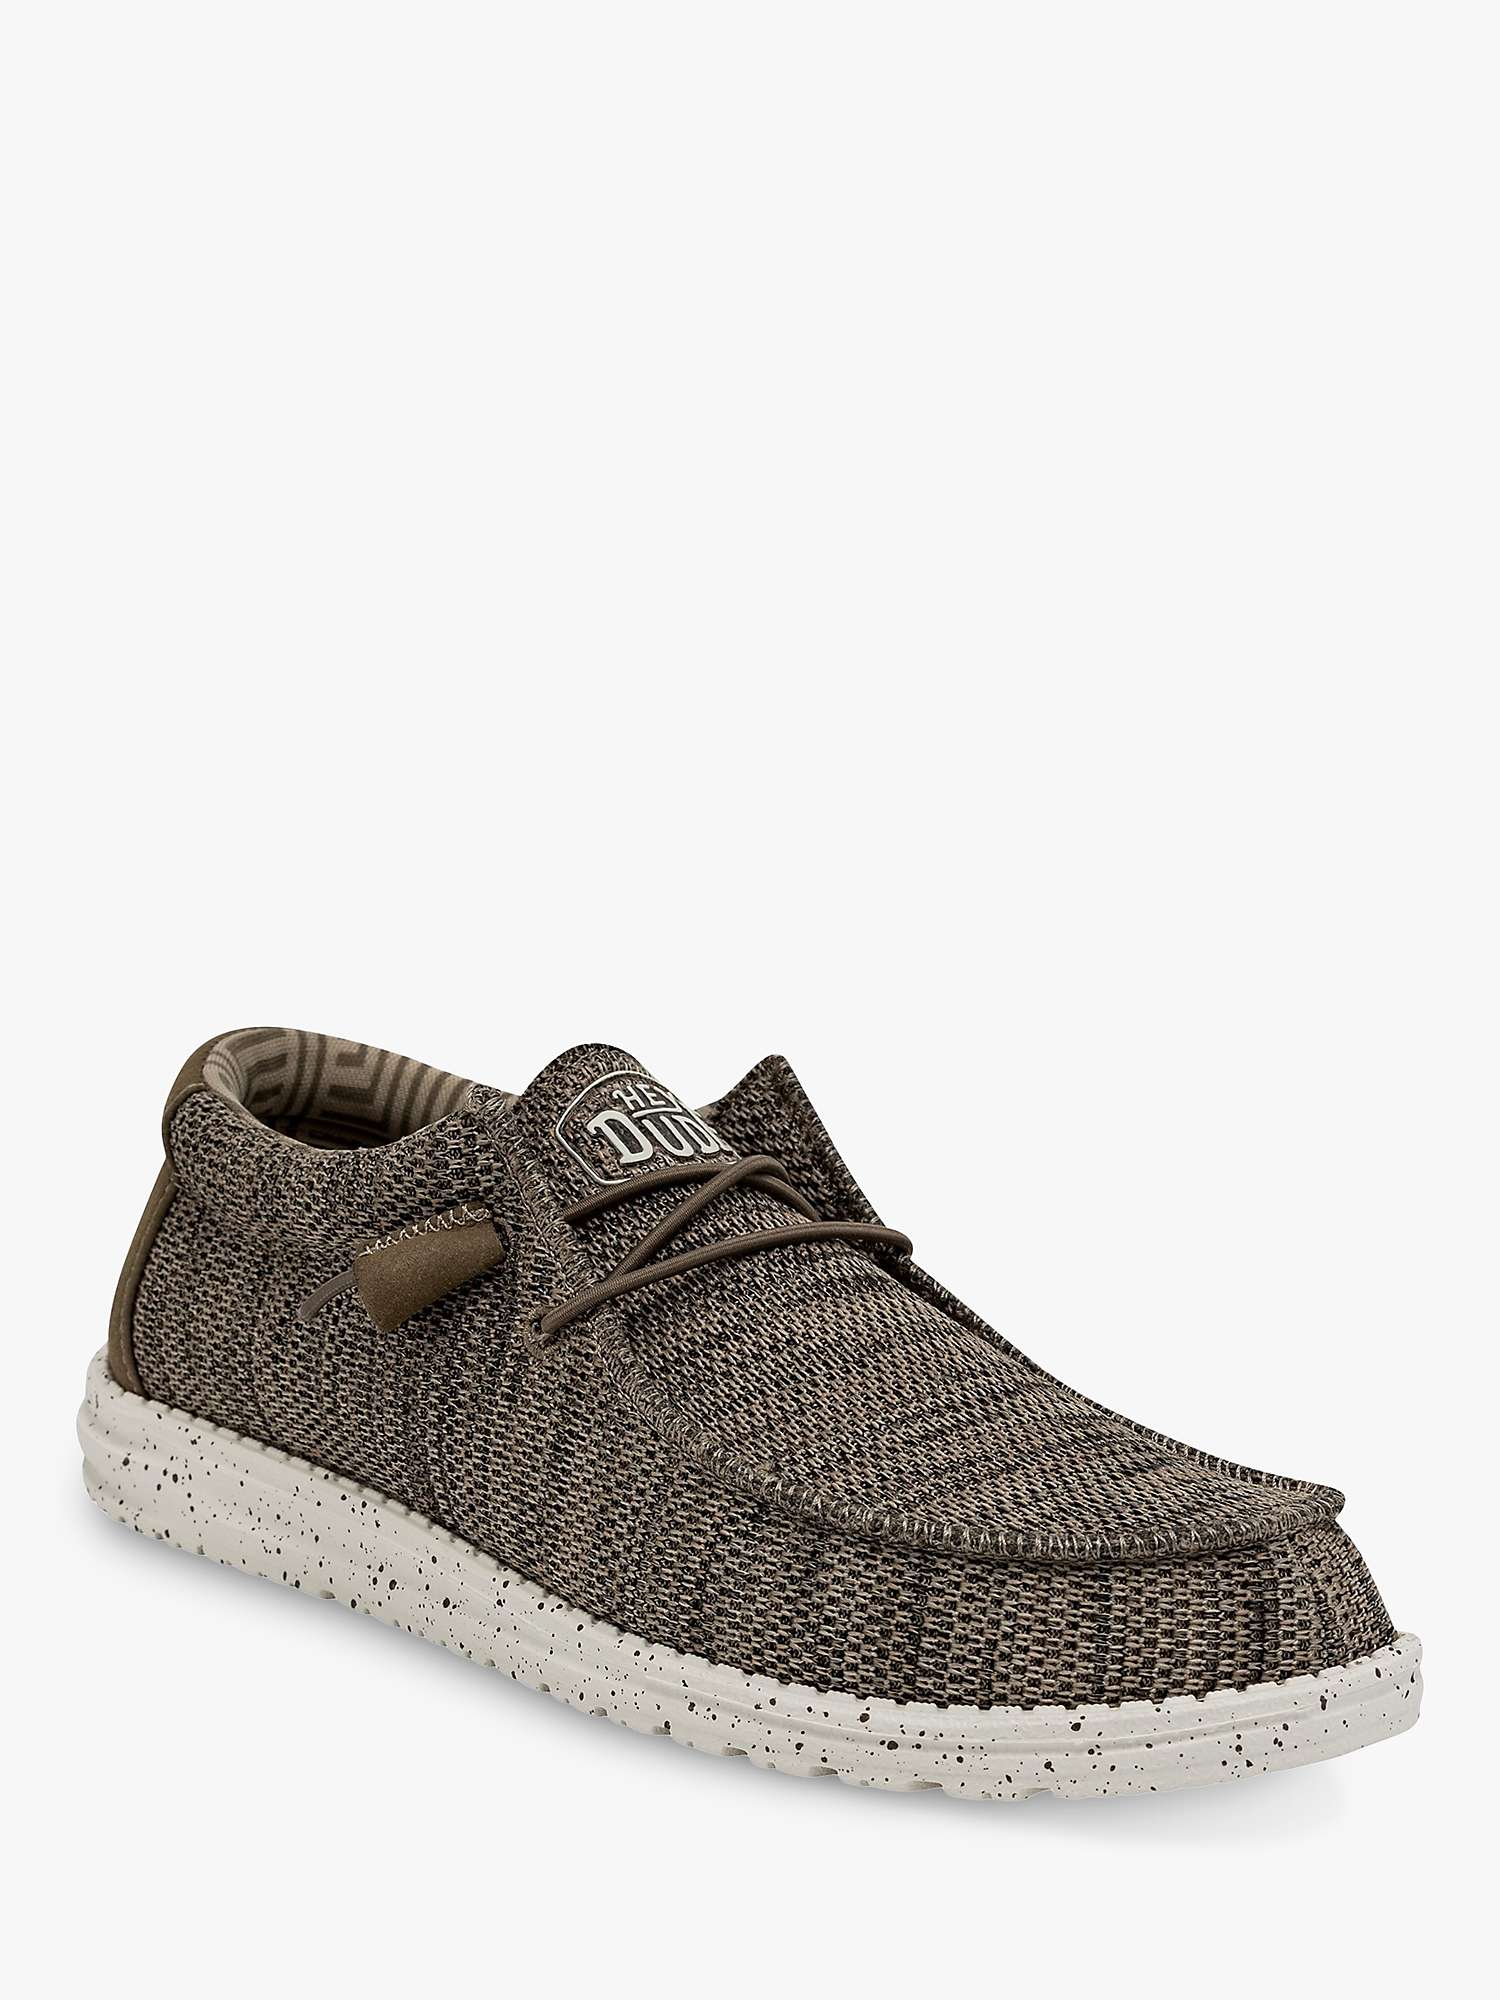 Buy Hey Dude Wally Sox Shoes, Brown Online at johnlewis.com